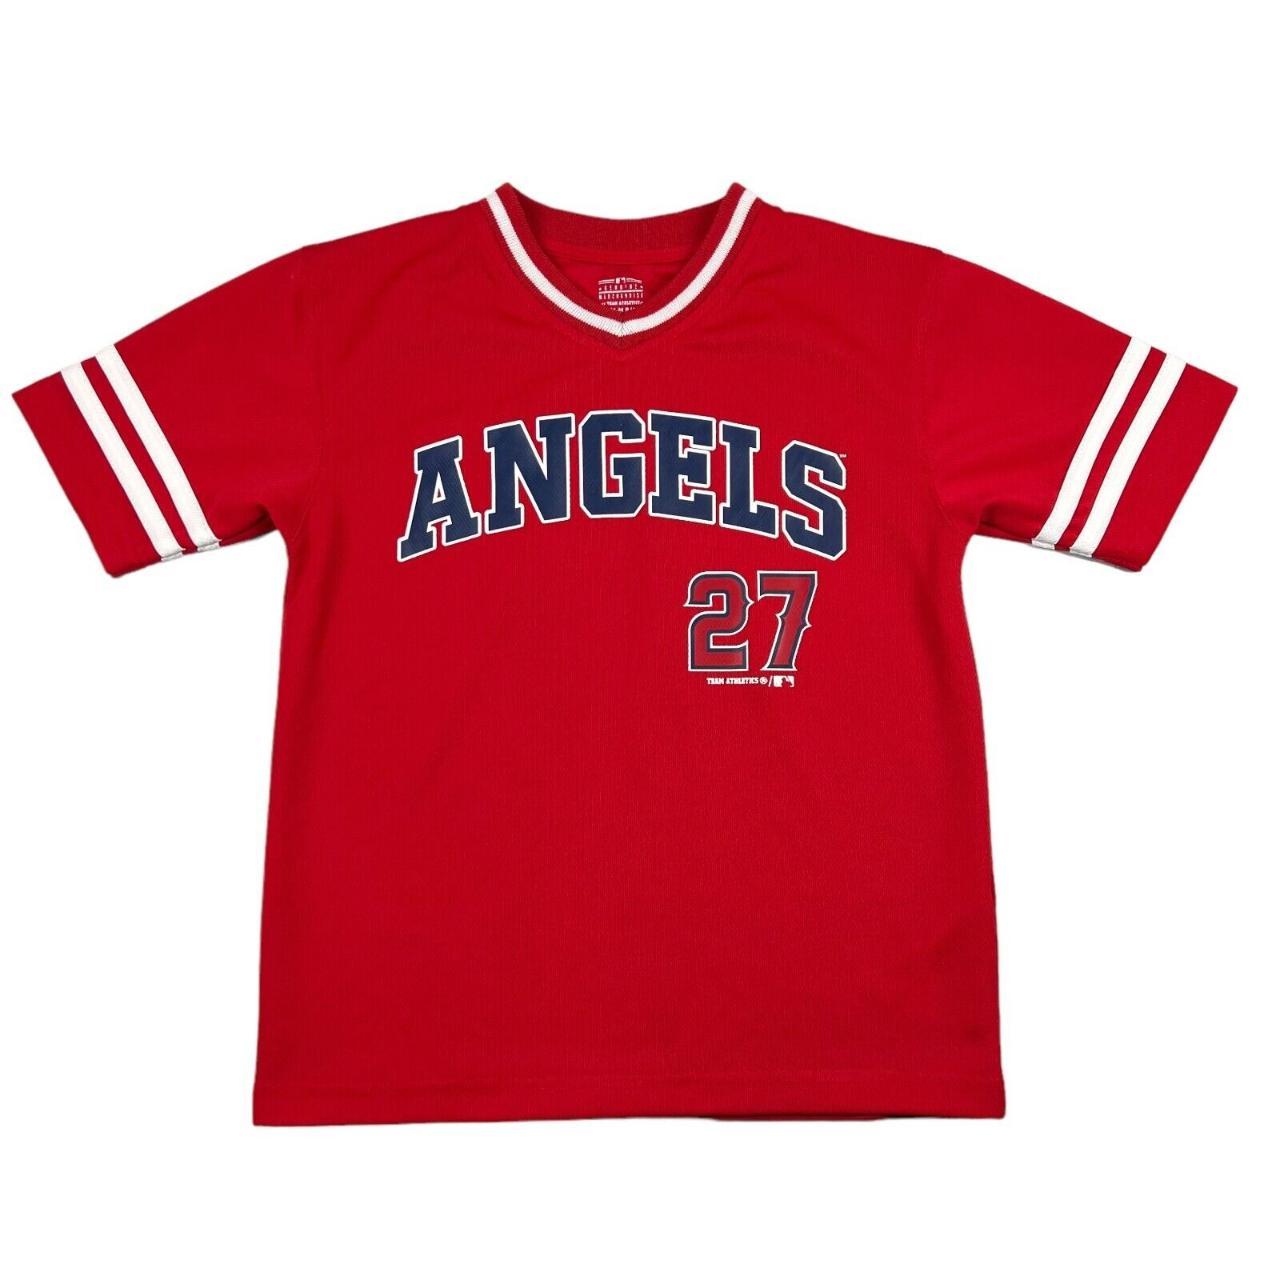 LOS ANGELES ANGELS MIKE TROUT JERSEY T-SHIRT MEDIUM MAJESTIC